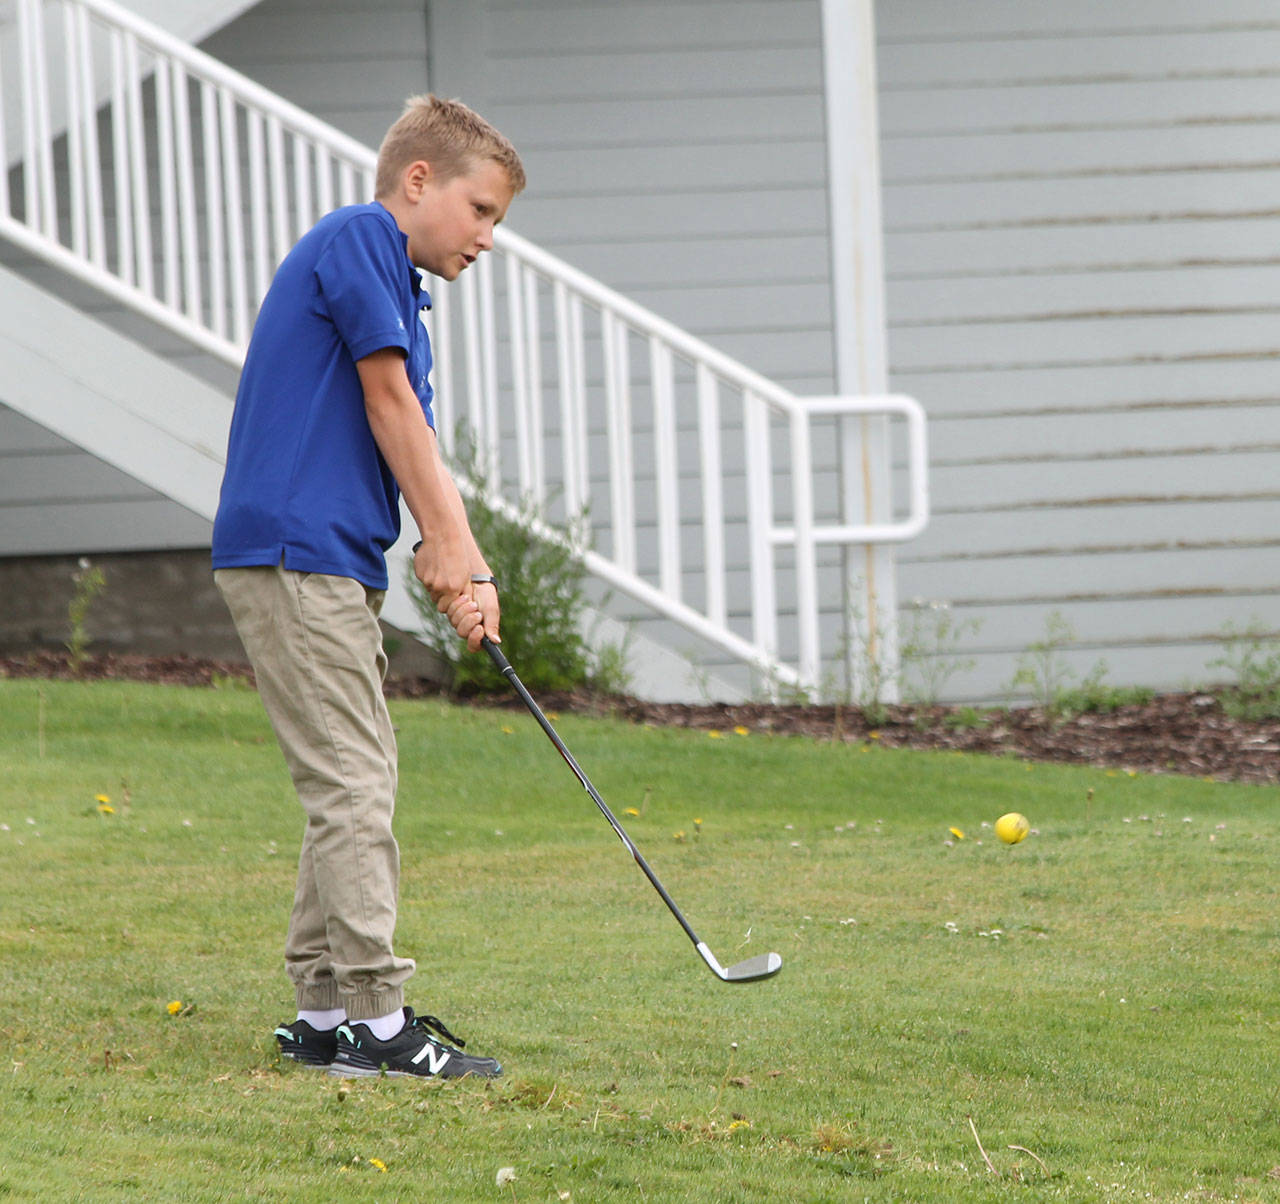 Nathan Hacket chips during Junior Golf Camp this week at the Whidbey Golf Club.(Photo by Jim Waller/Whidbey News-Times)